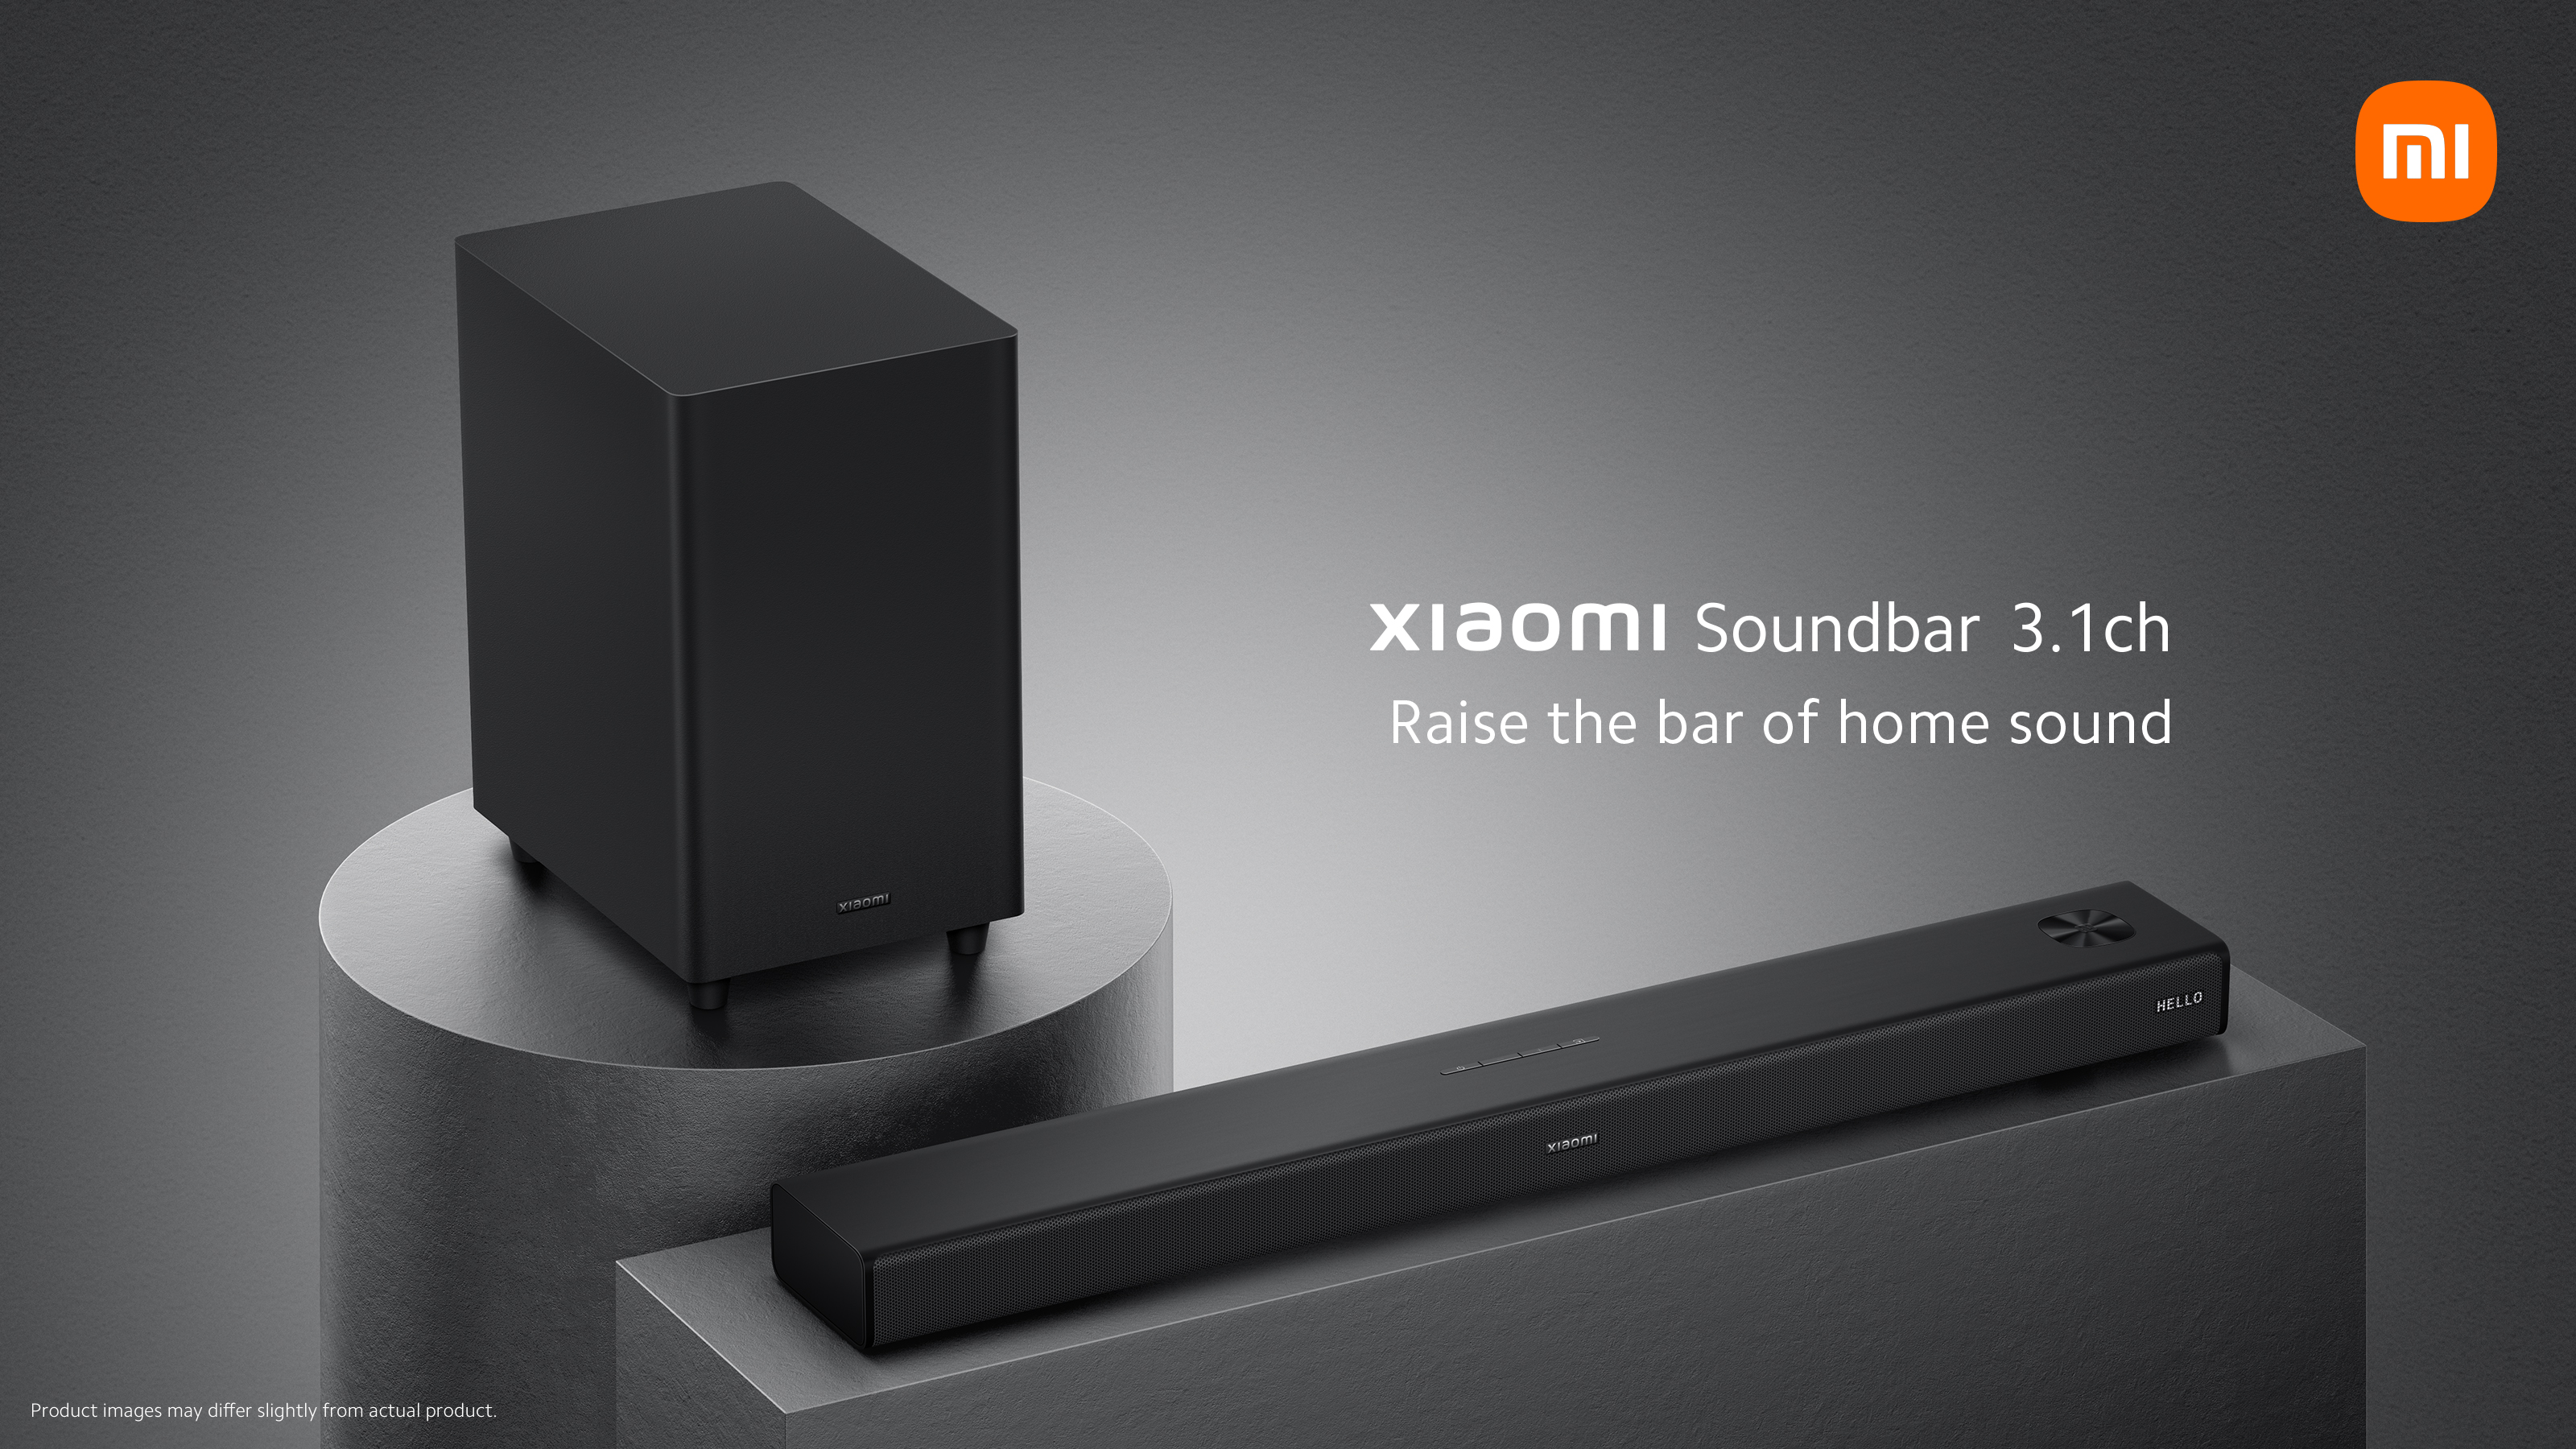 Xiaomi announced Soundbar 3.1ch with wireless subwoofer, 430W power, Dolby Audio and NFC support